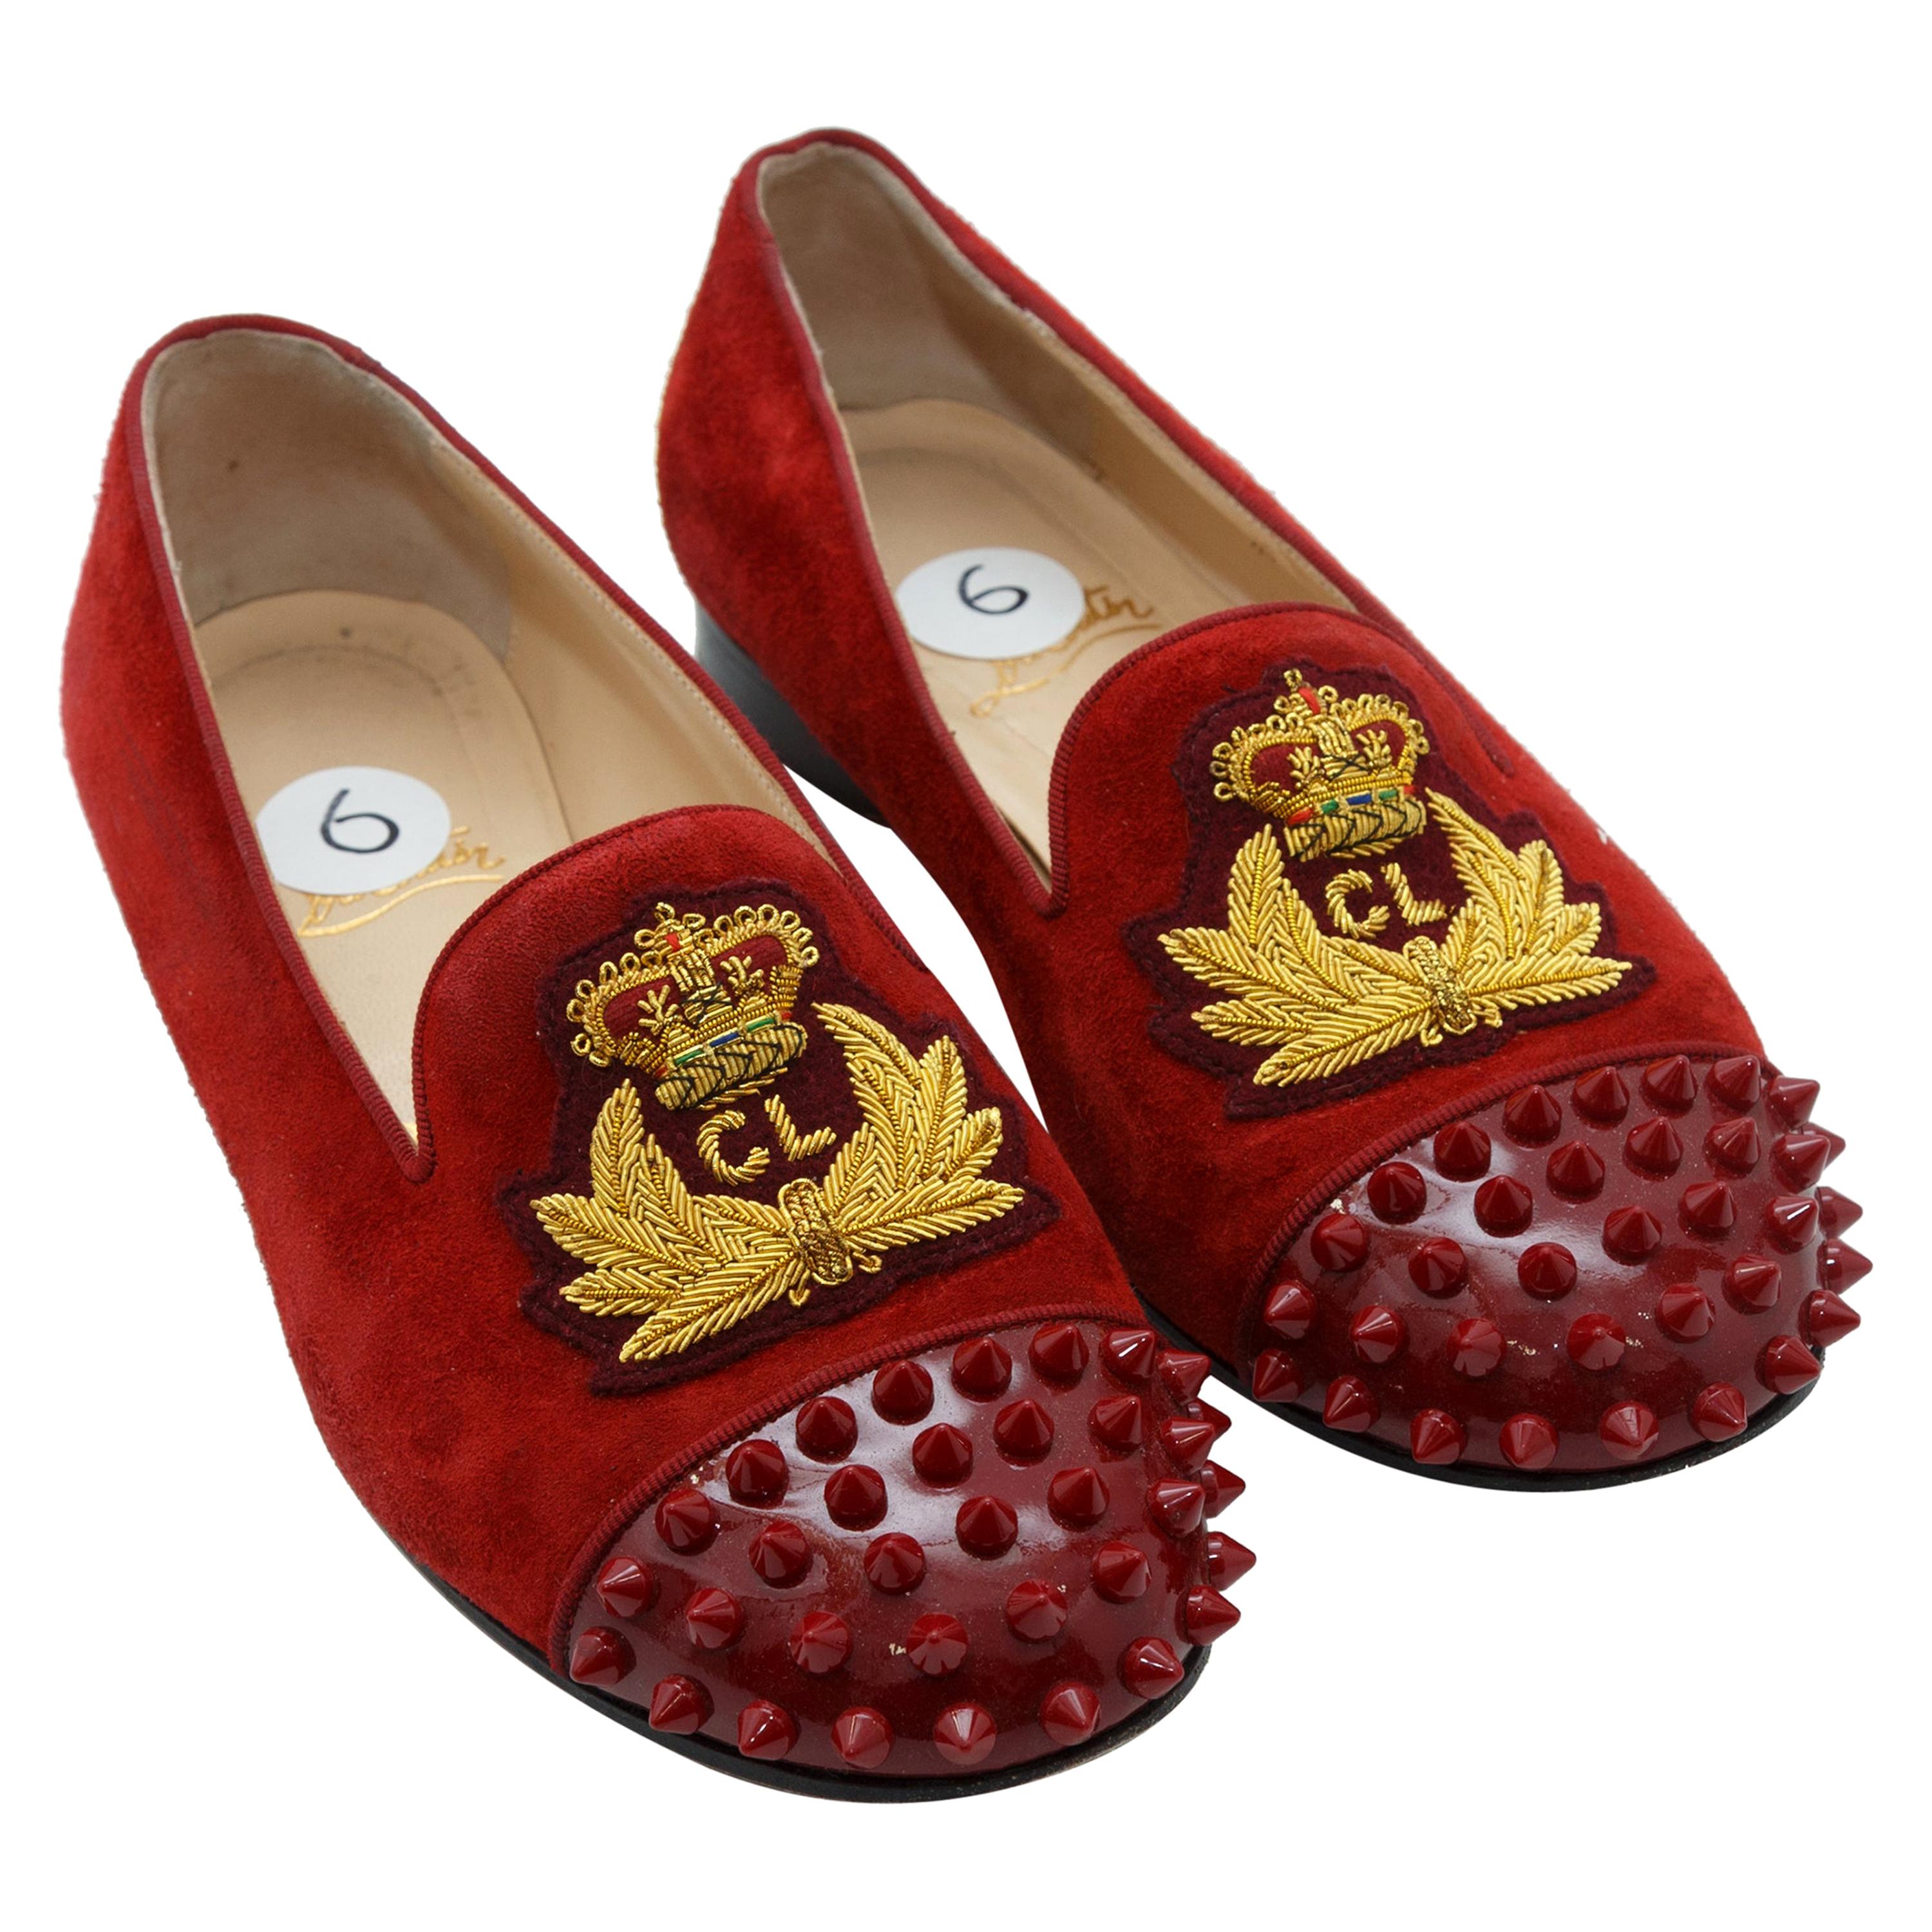 Christian Louboutin Red Suede Studded Flats